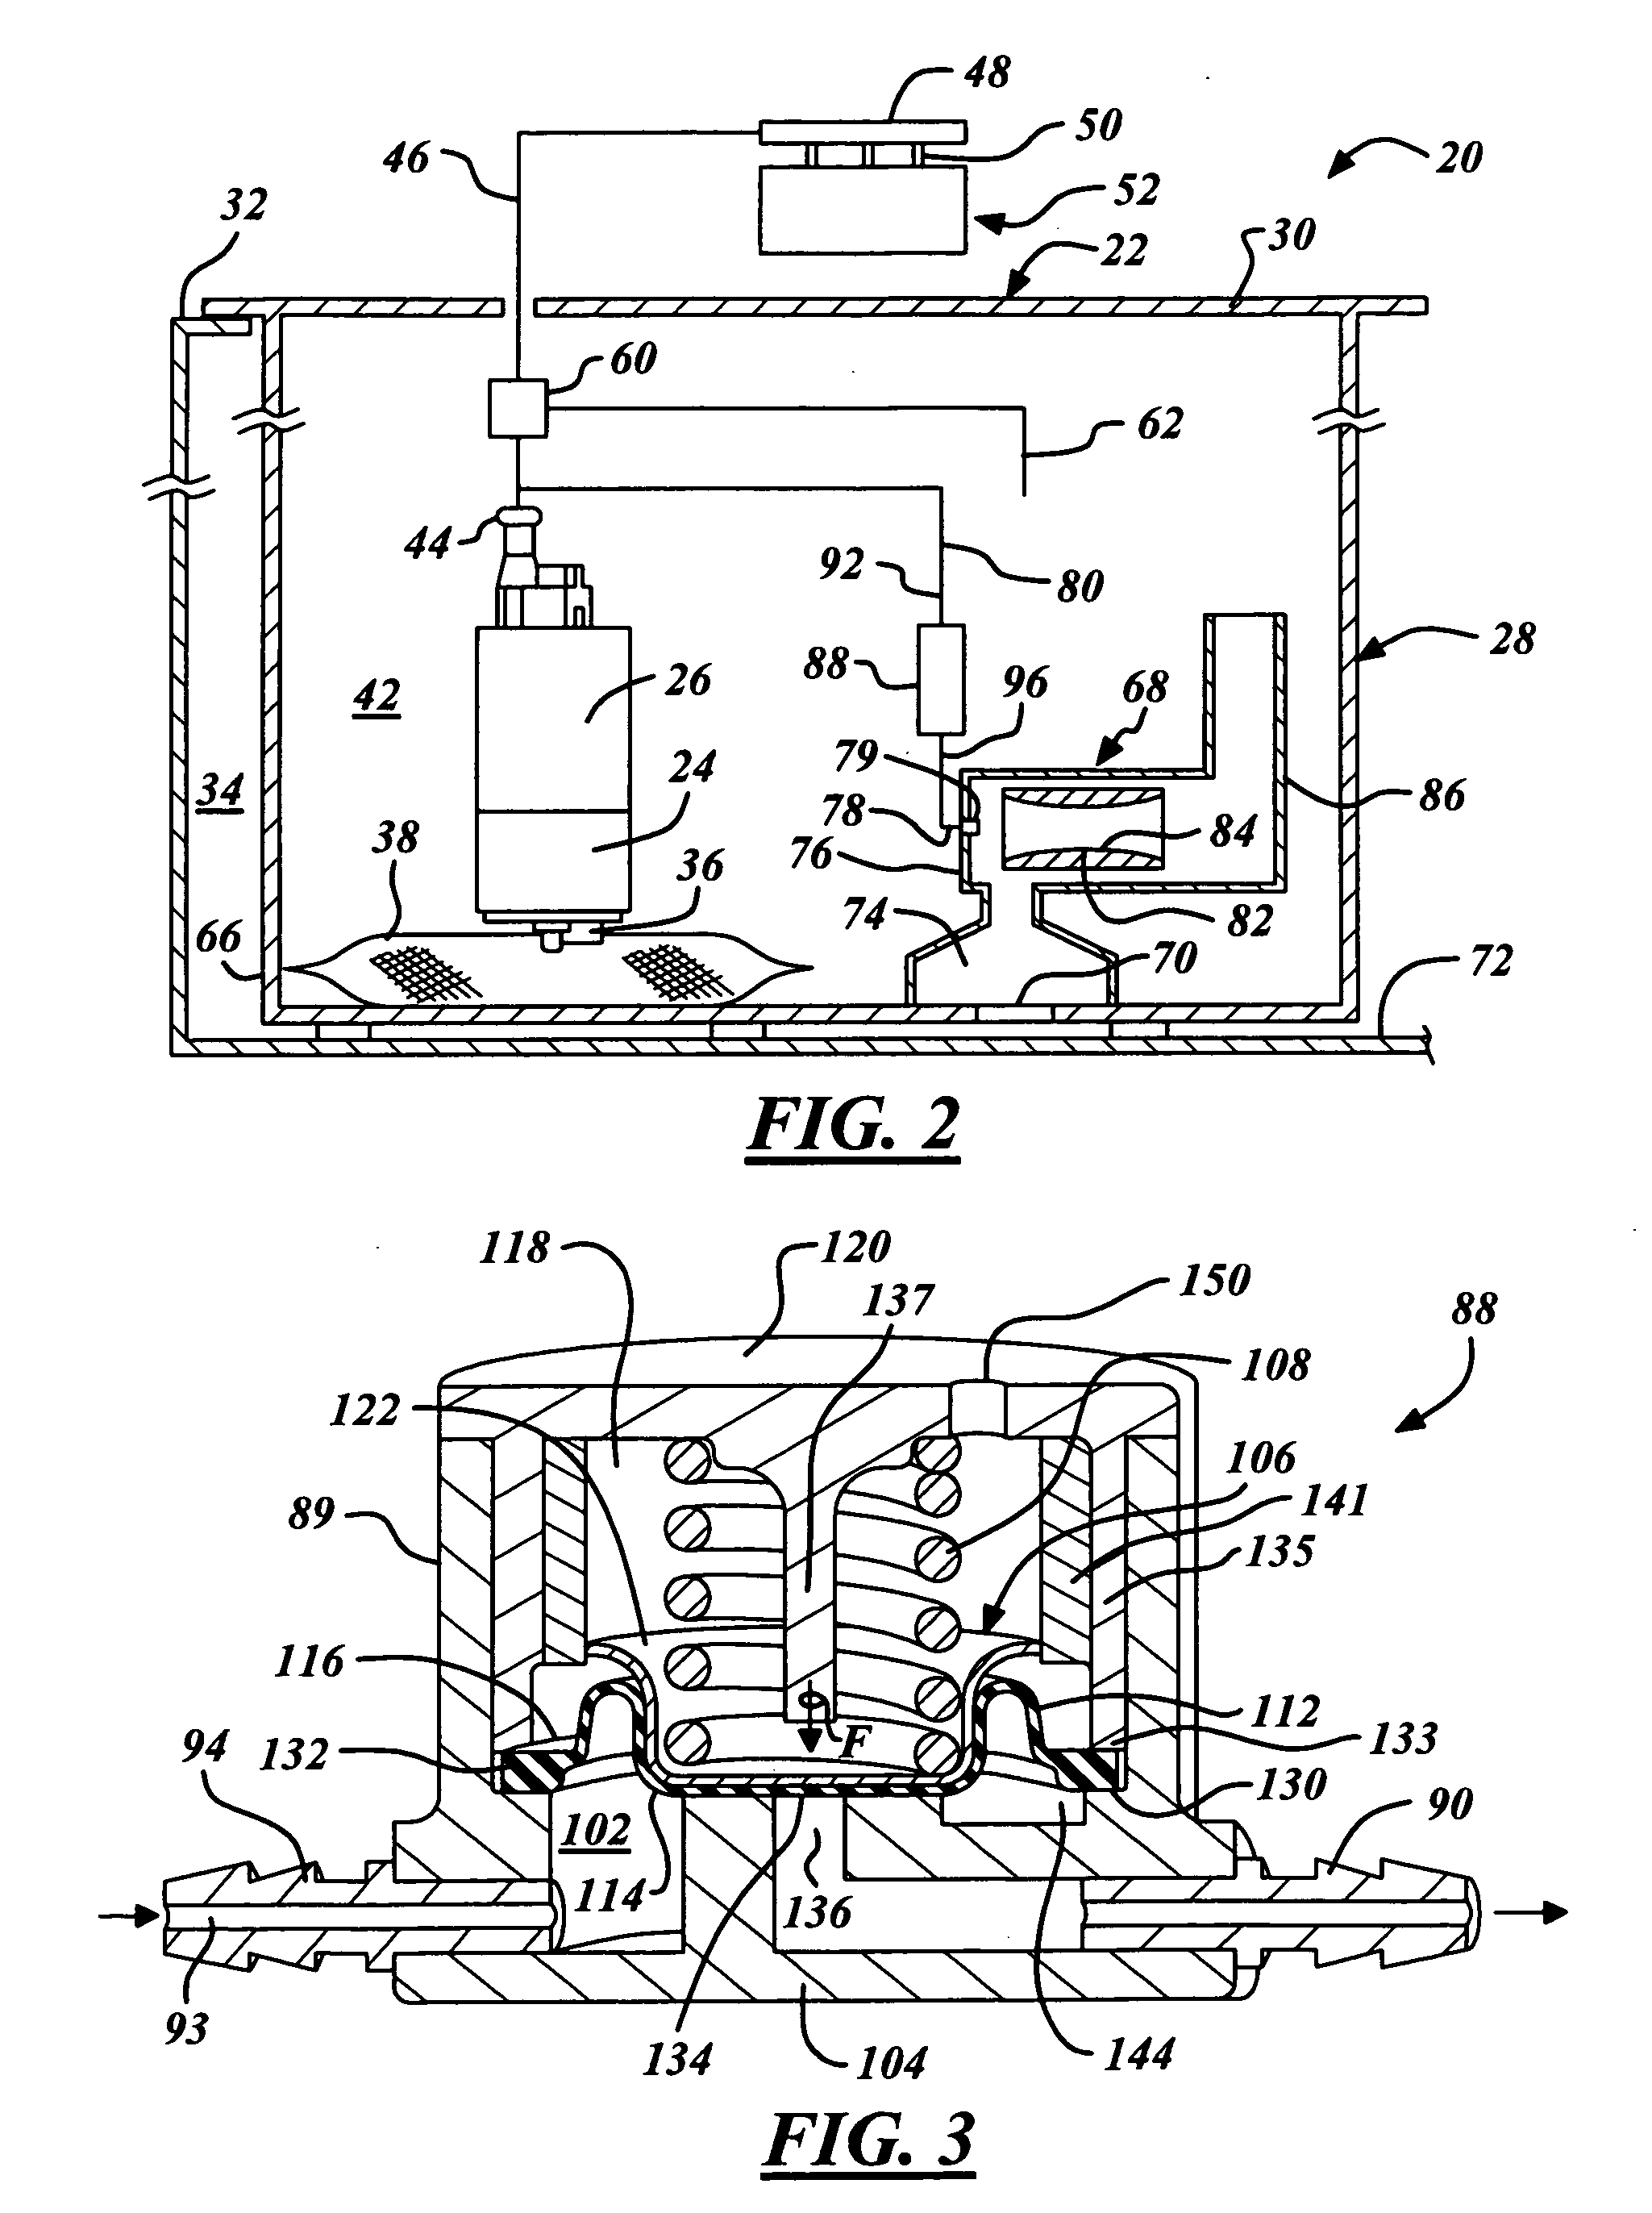 Jet pump assembly of a fuel system for a combustion engine